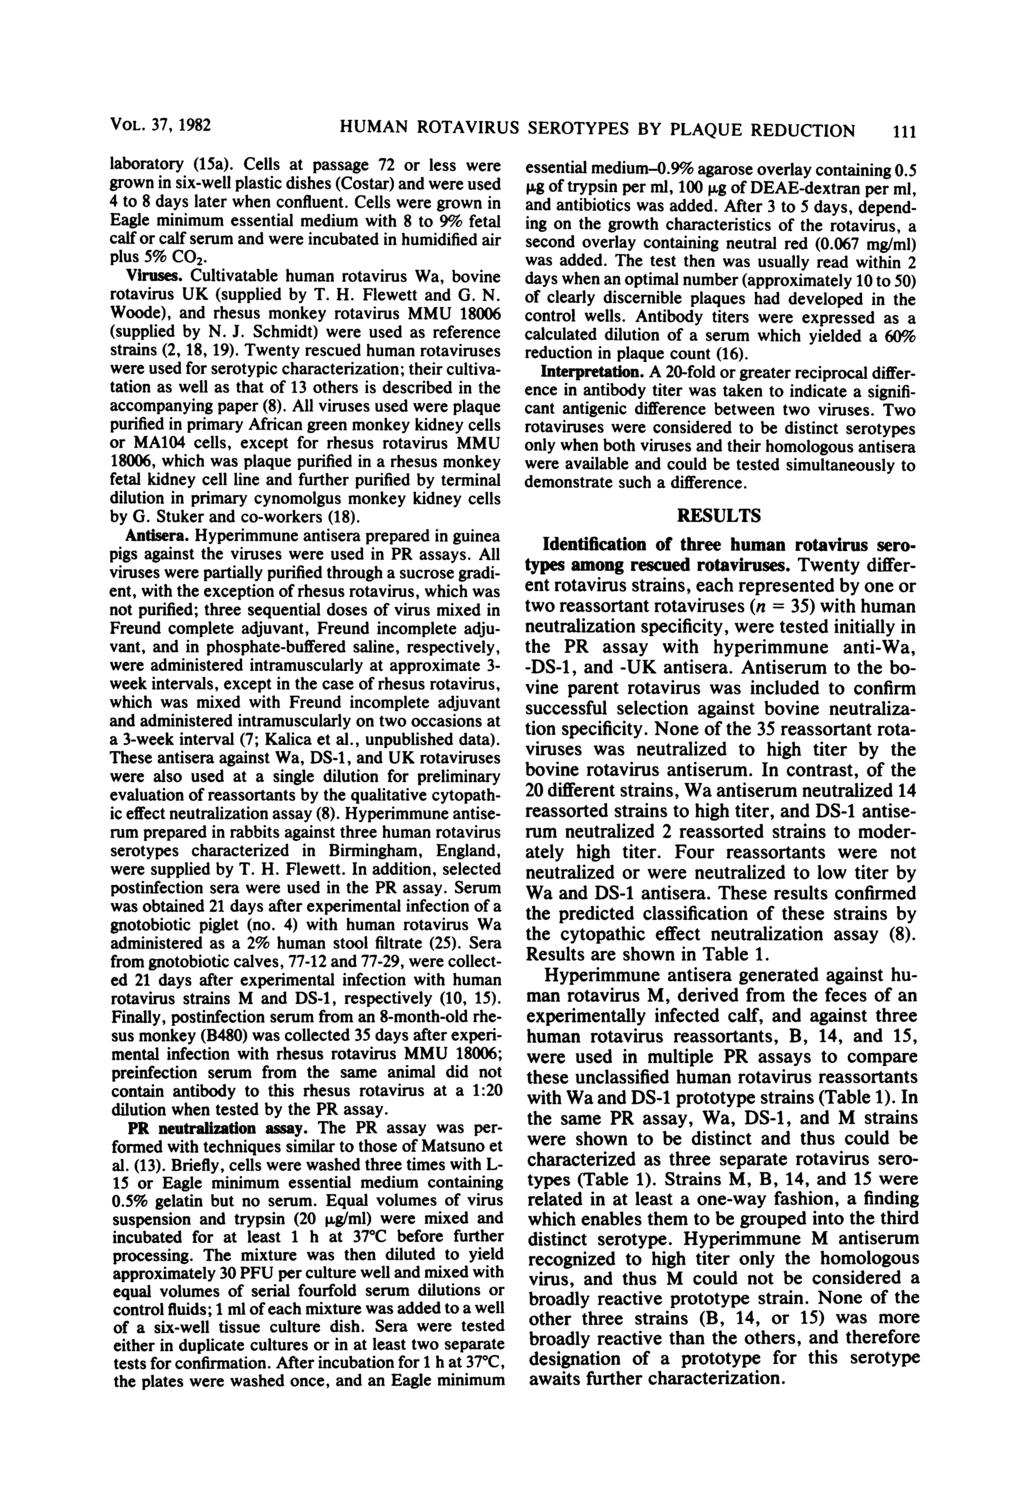 VOL. 37, 1982 laboratory (1Sa). Cells at passage 72 or less were grown in six-well plastic dishes (Costar) and were used 4 to 8 days later when confluent.